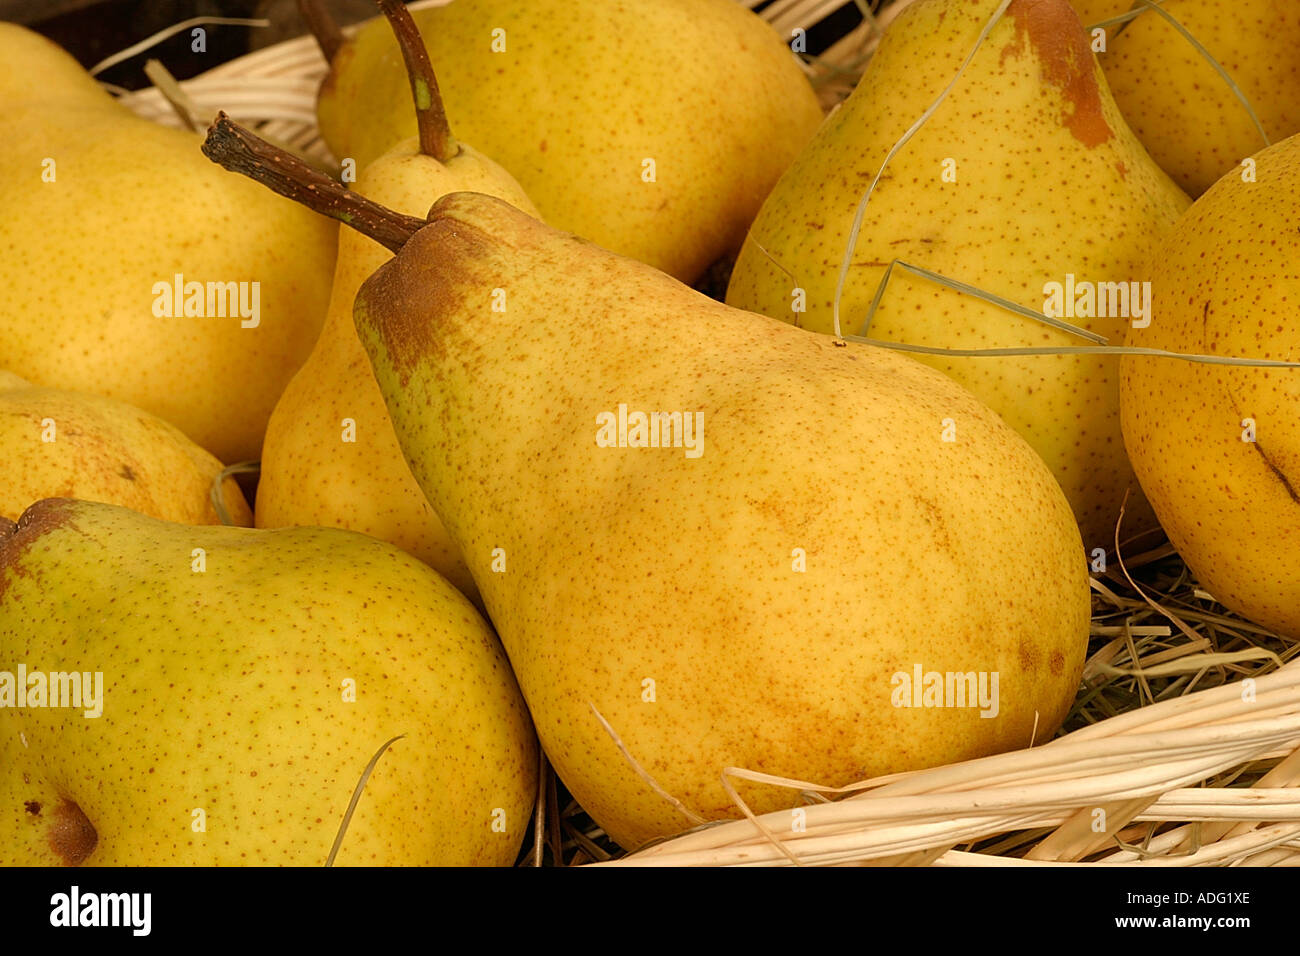 Trionfo di Packam pear Italy Stock Photo